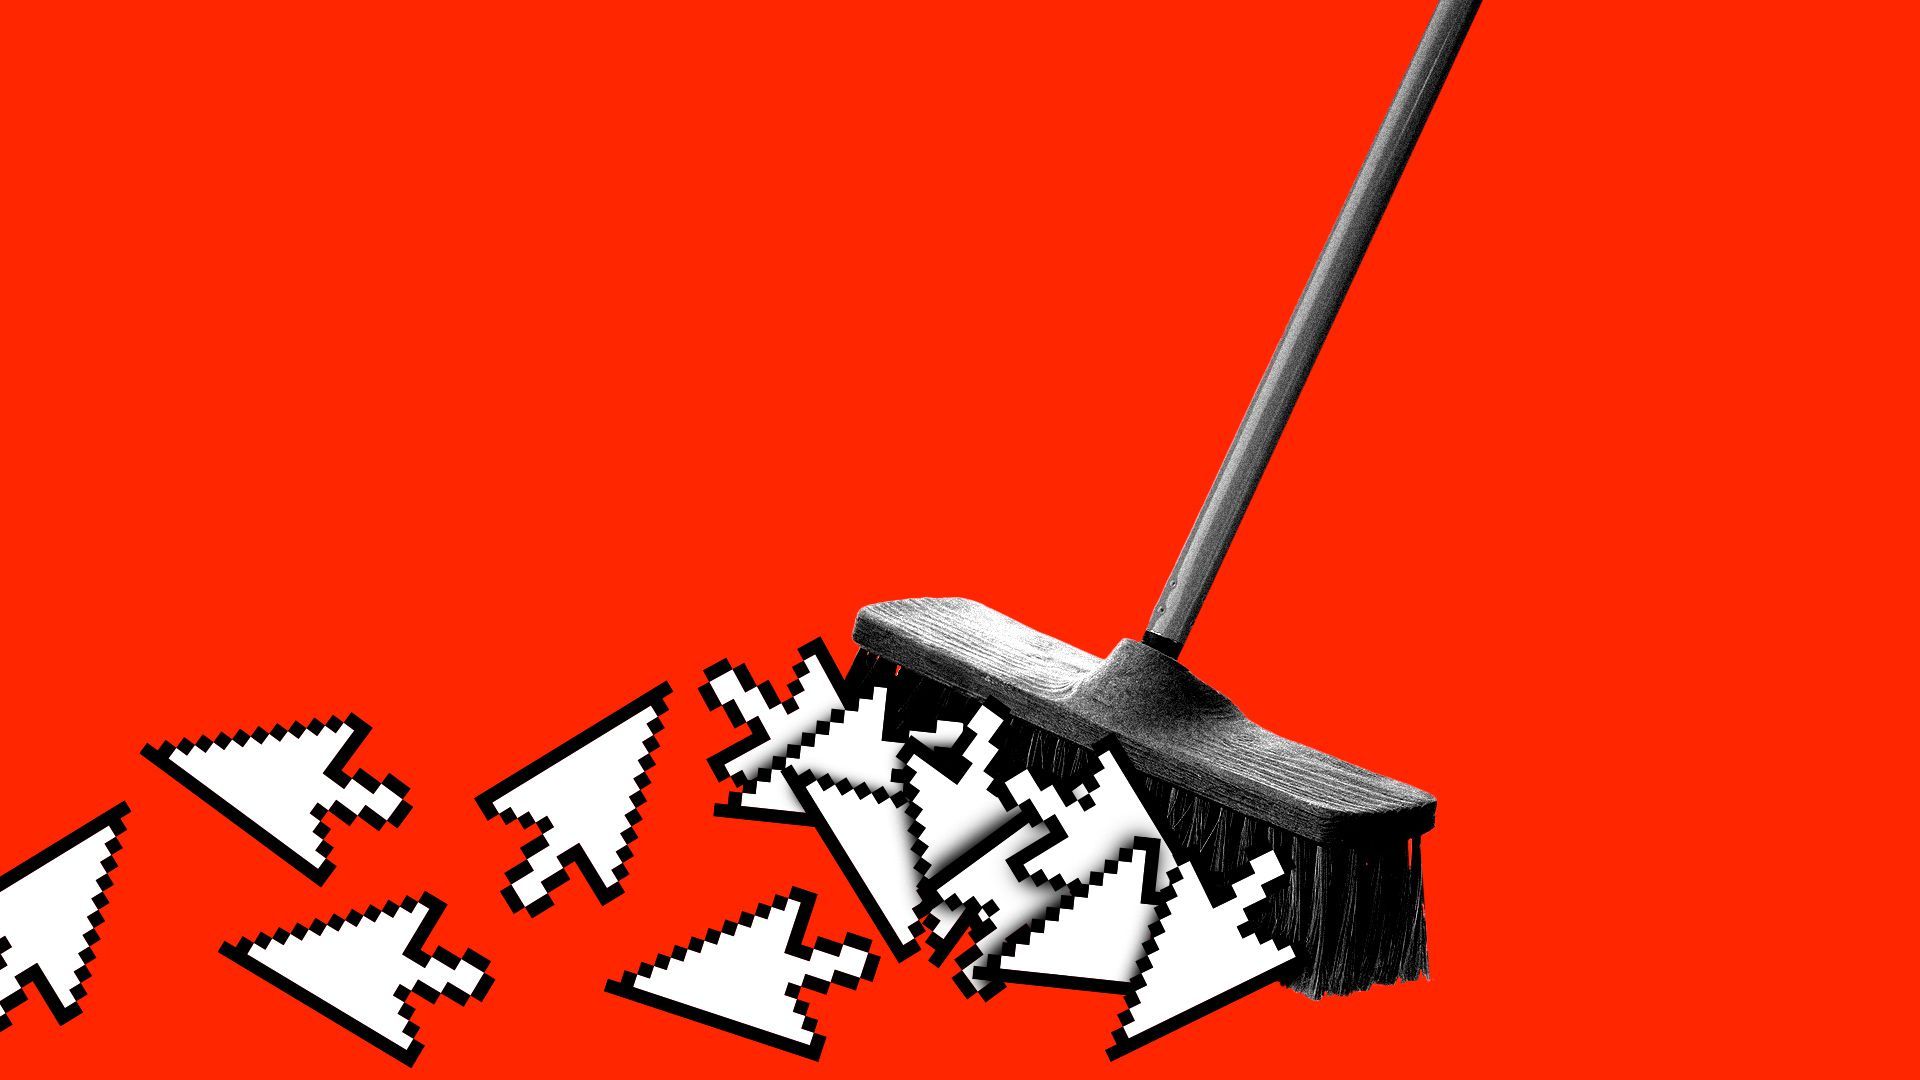 Illustration of a push broom sweeping a pile of sliders. 